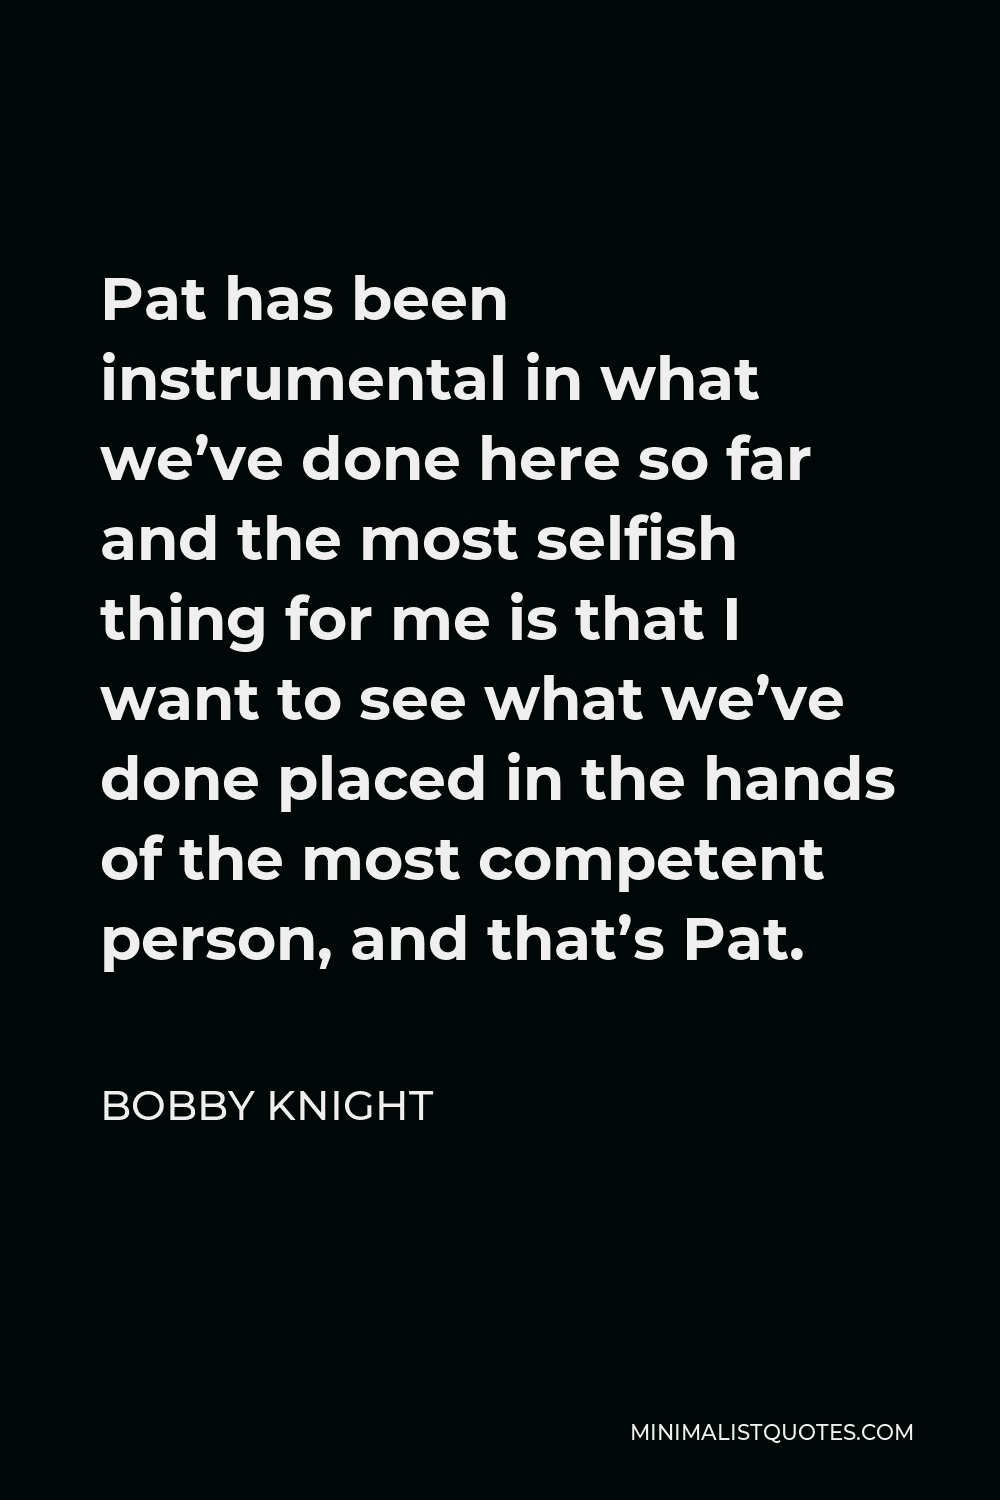 Bobby Knight Quote - Pat has been instrumental in what we’ve done here so far and the most selfish thing for me is that I want to see what we’ve done placed in the hands of the most competent person, and that’s Pat.